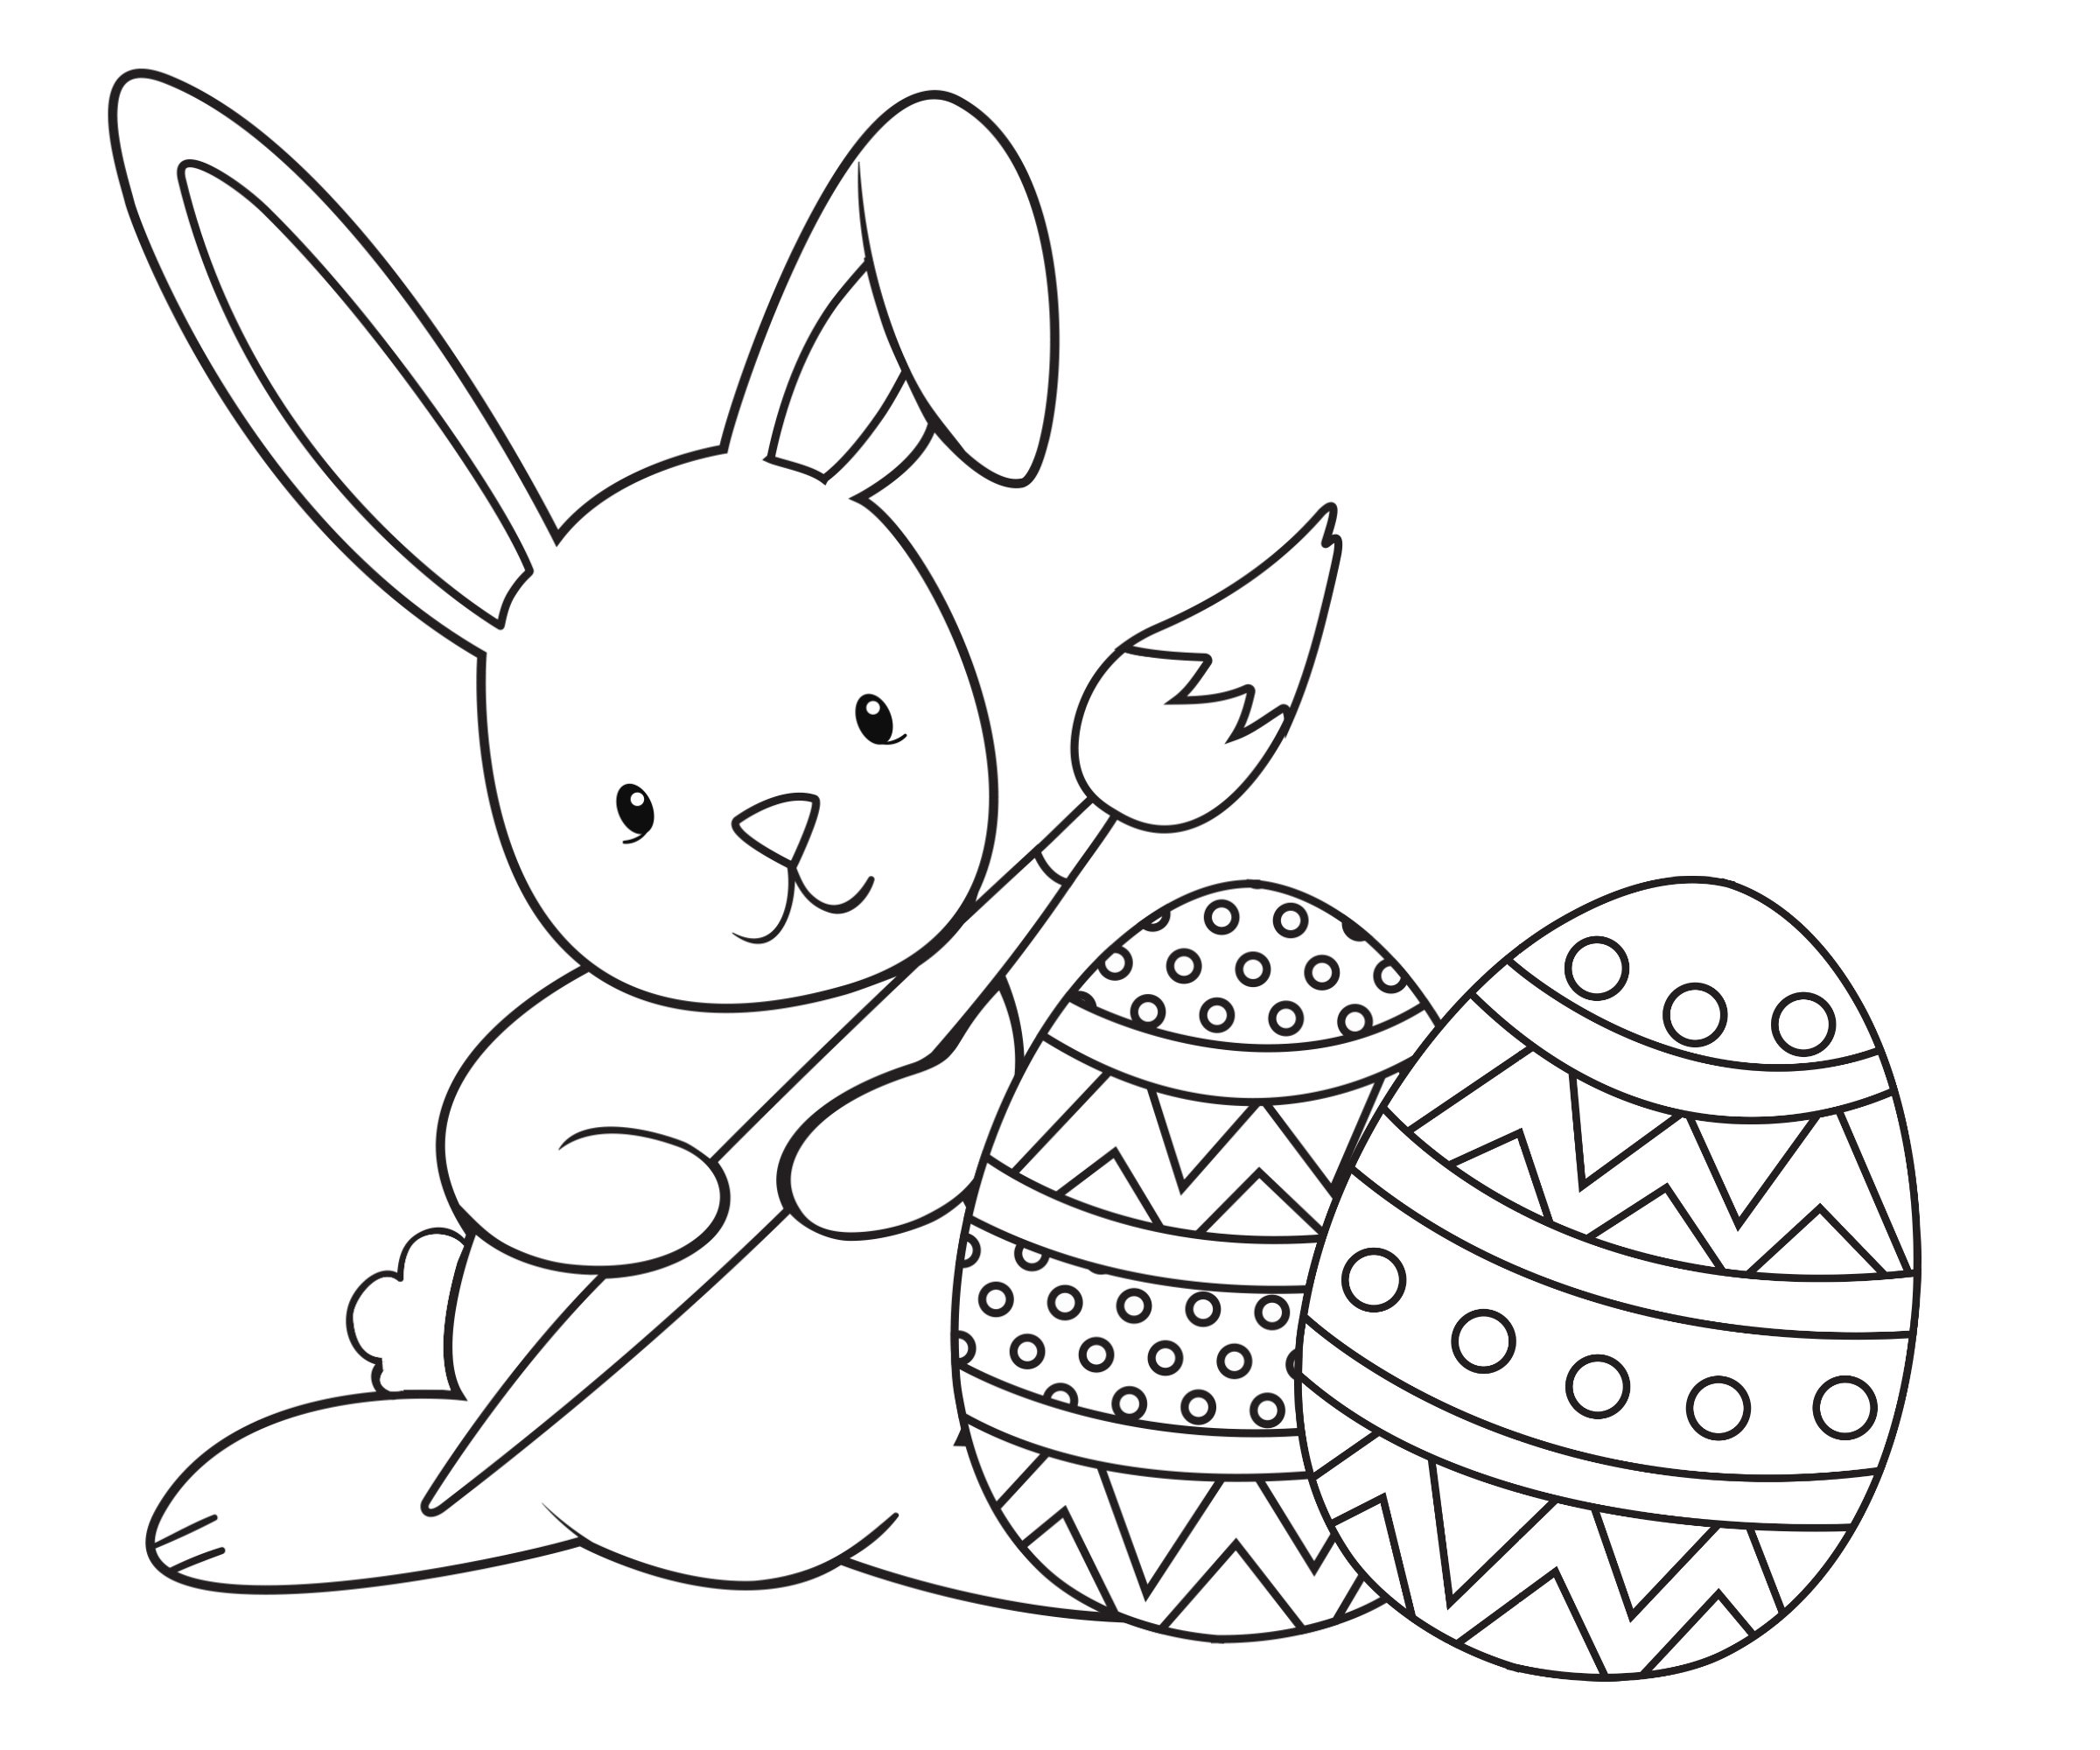 Easter Bunny Coloring Pages - Kidsuki